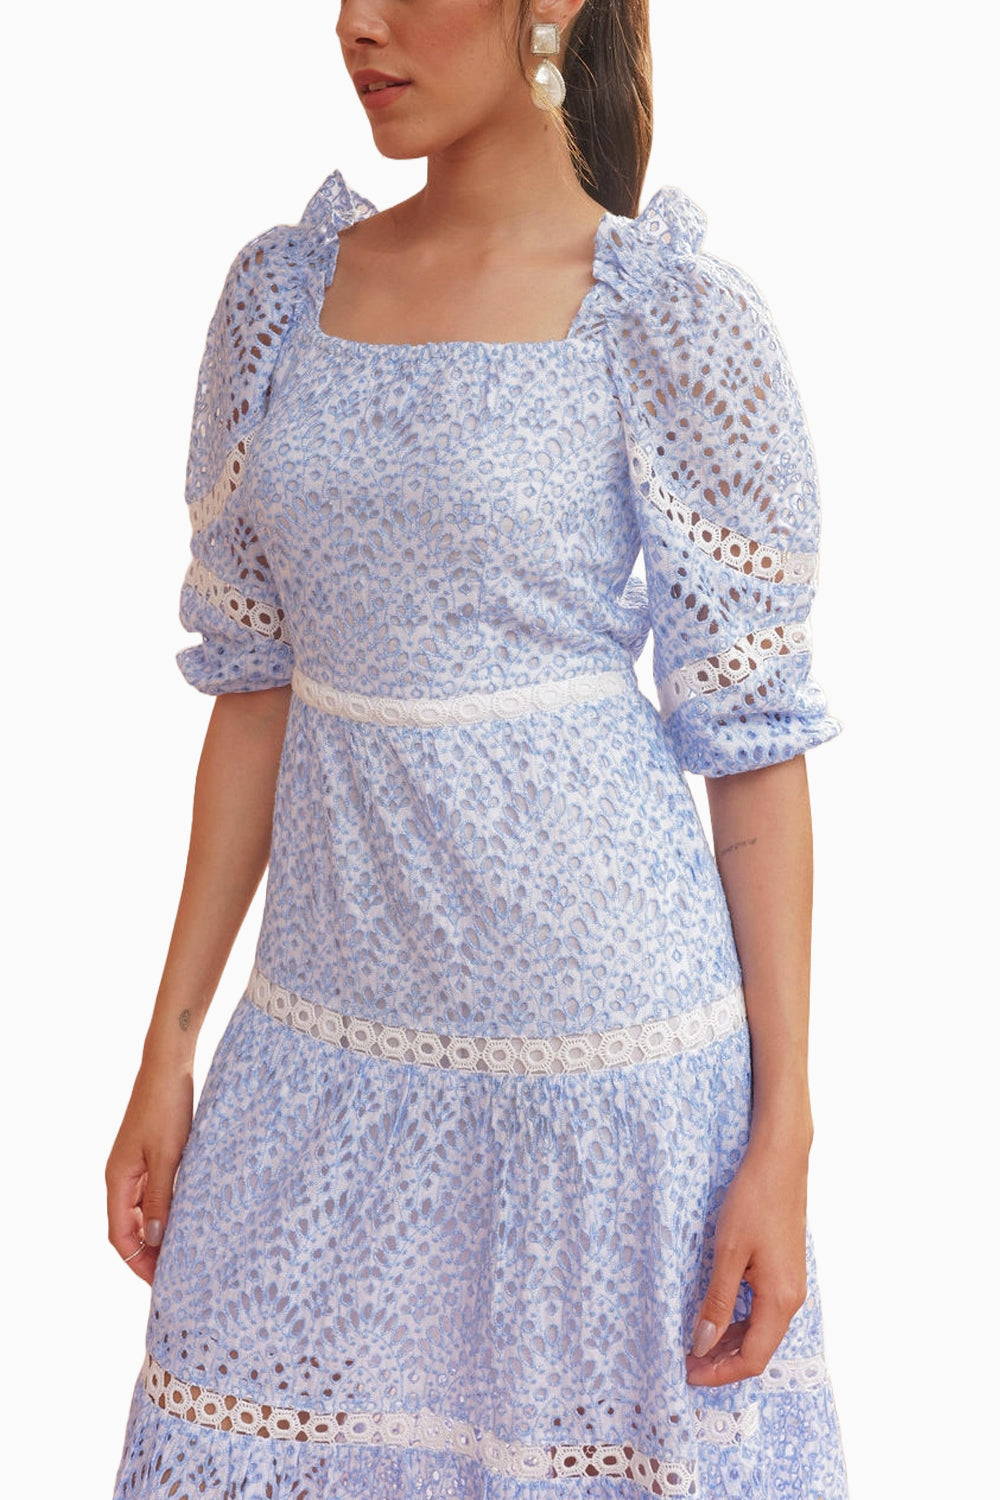 Pastel-Hue Intricate Detailed Broderie Anglaise  Dress